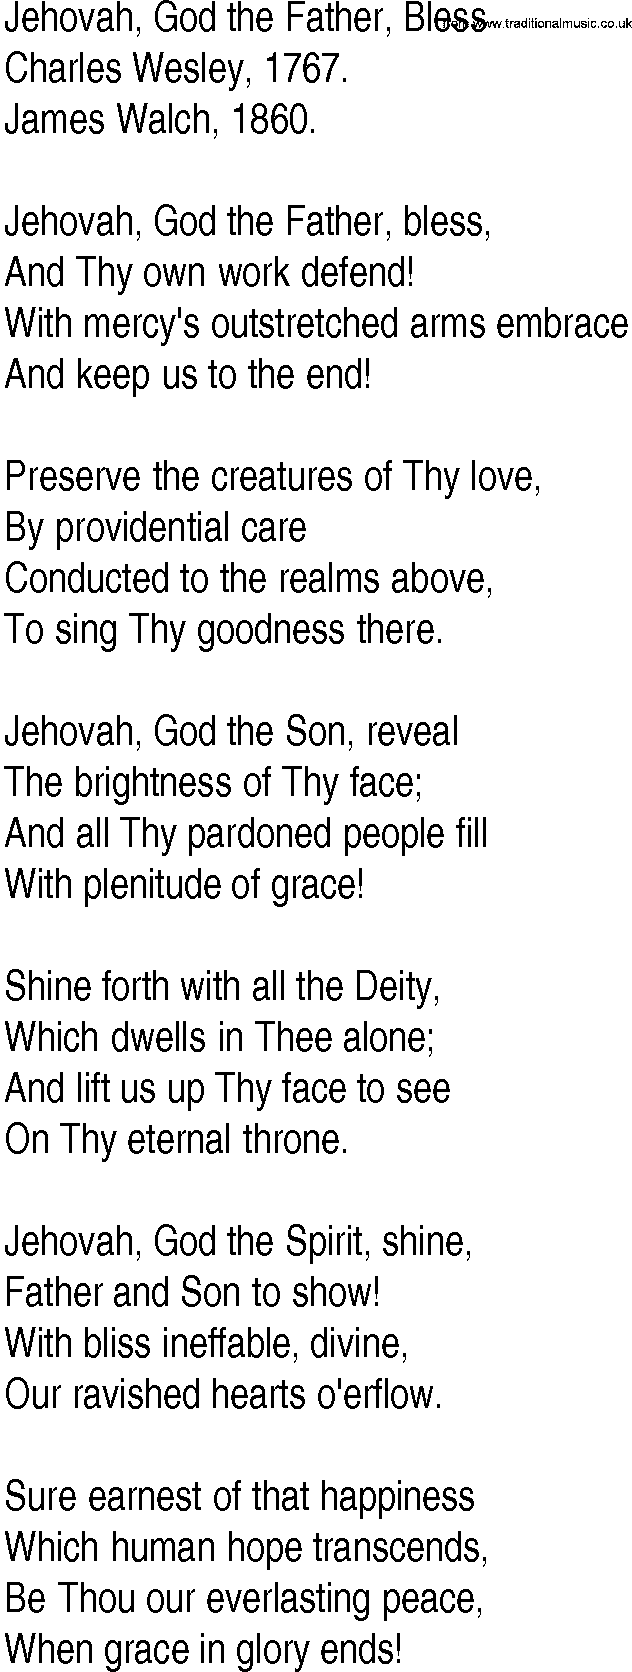 Hymn and Gospel Song: Jehovah, God the Father, Bless by Charles Wesley lyrics